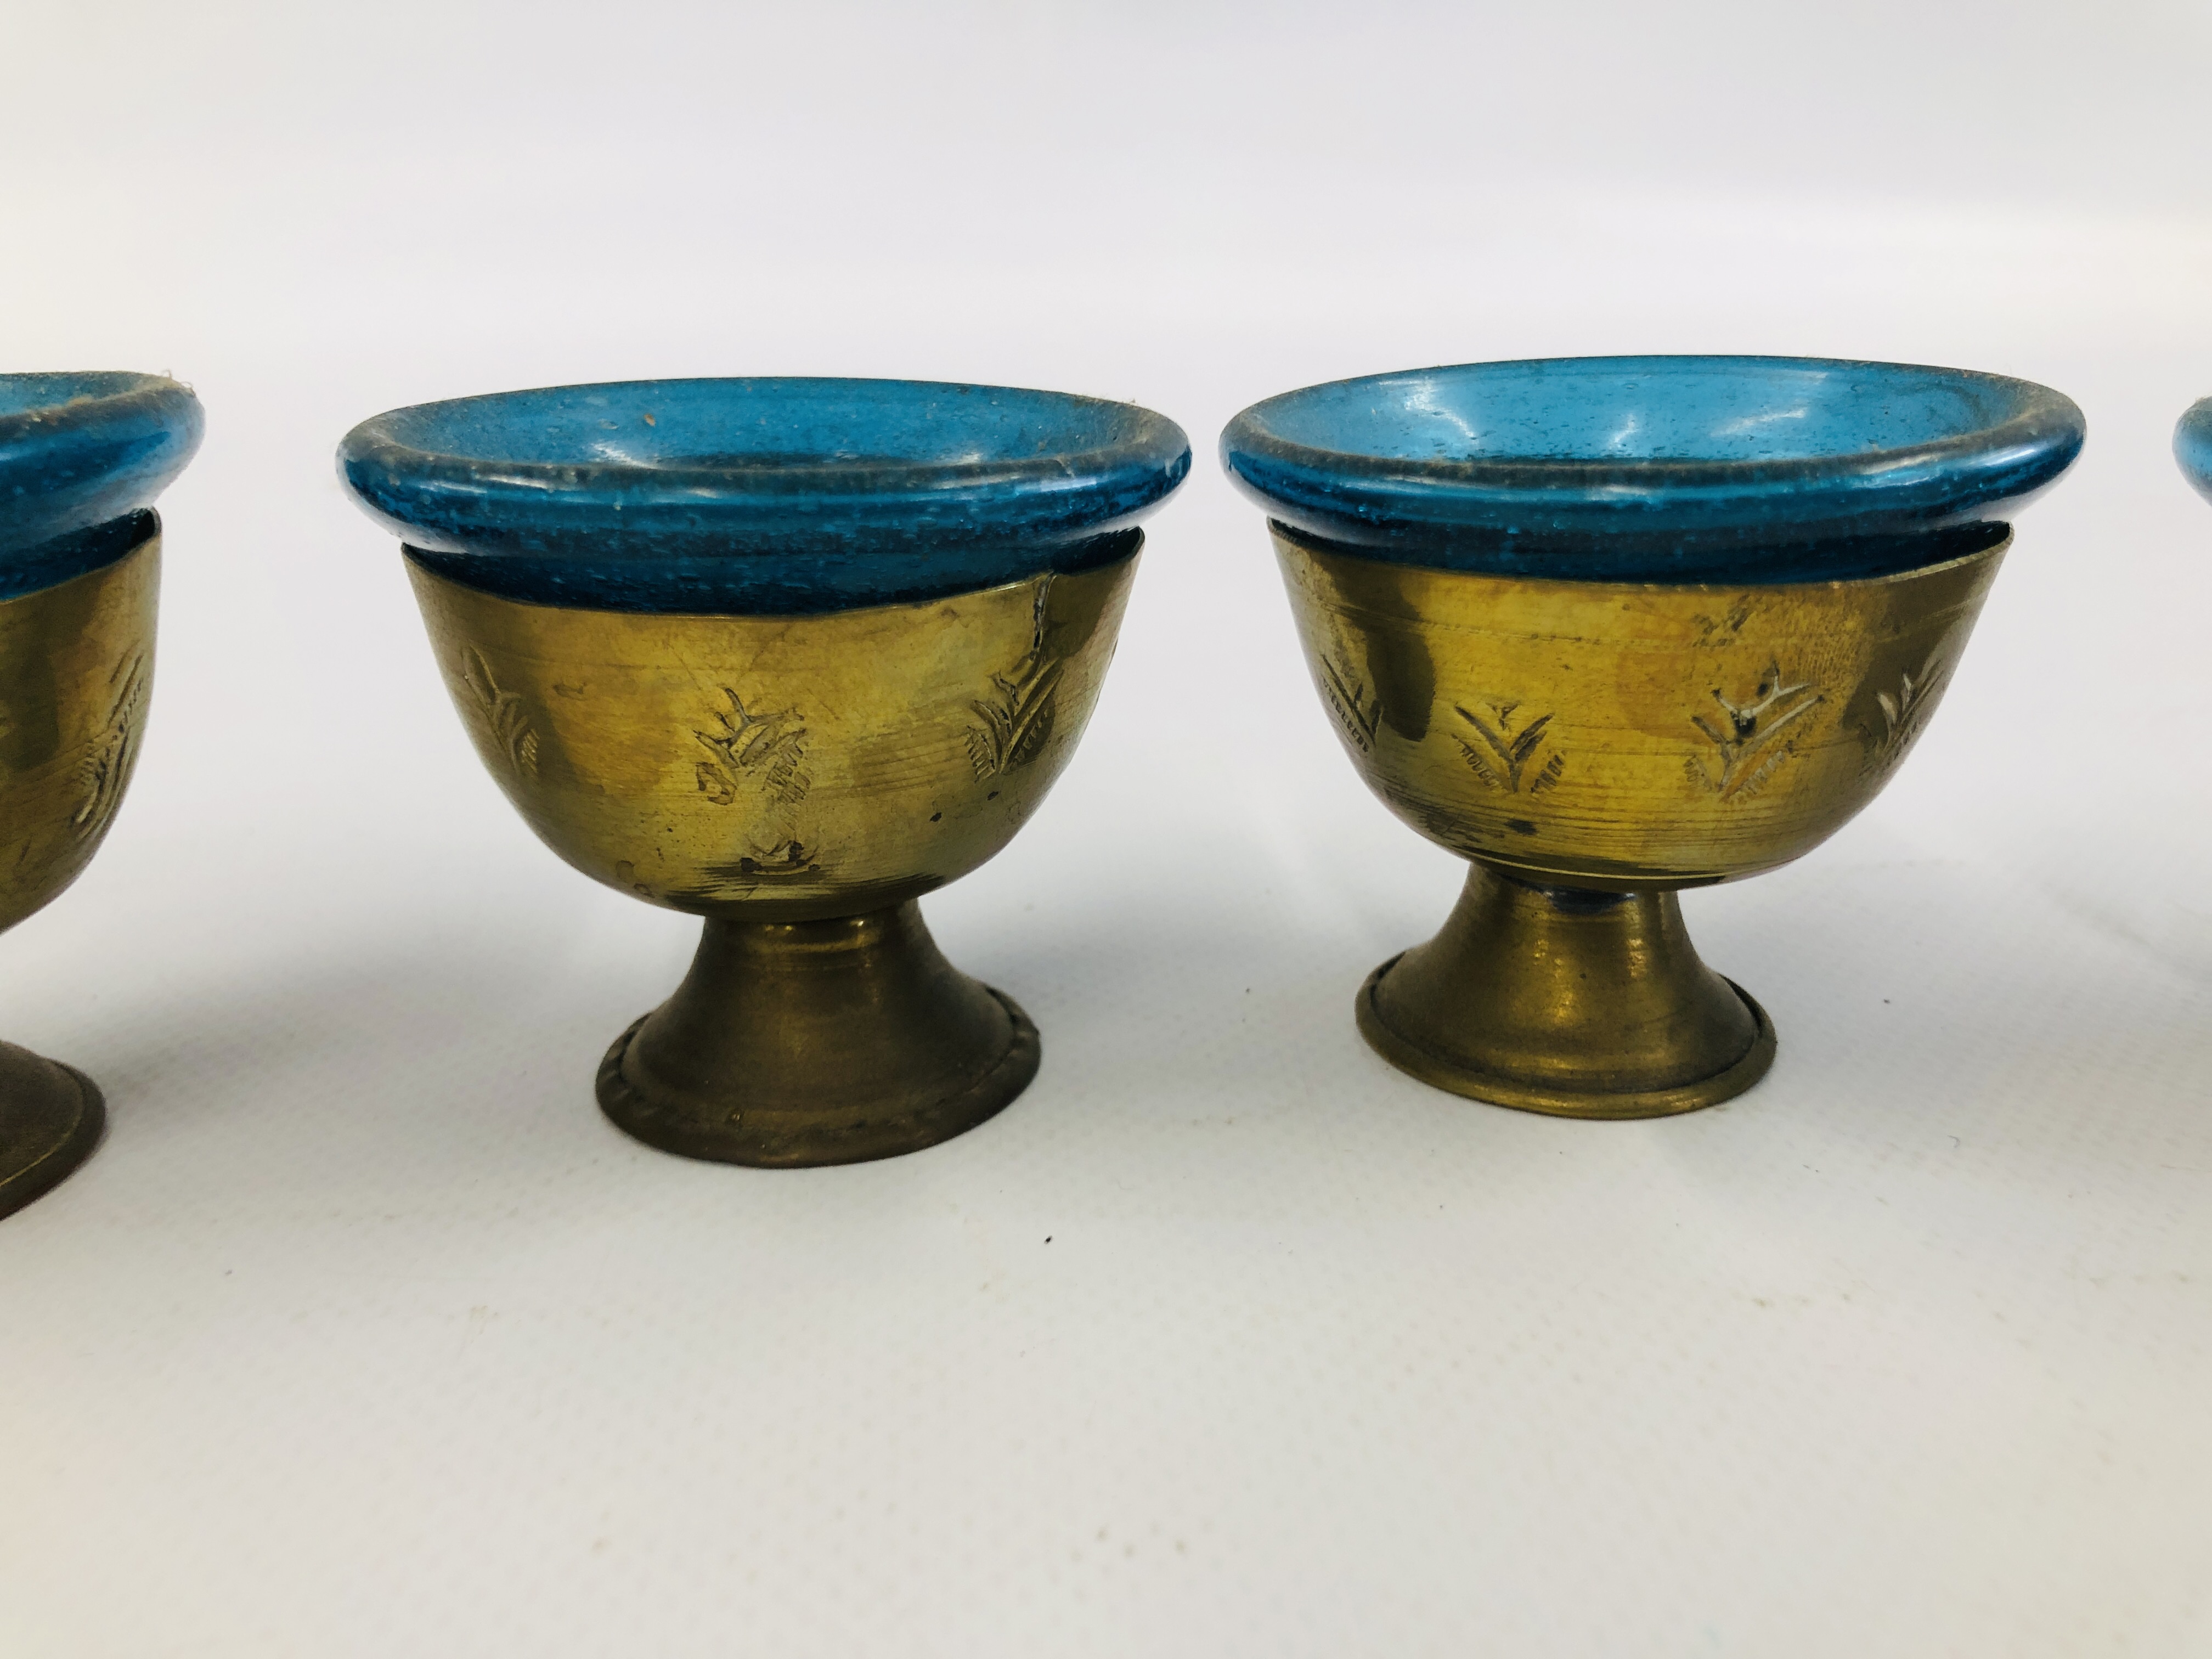 A SET OF SIX MIDDLE EASTERN BRASS GOBLET VESSELS WITH BLUE GLASS LINERS. - Image 3 of 11